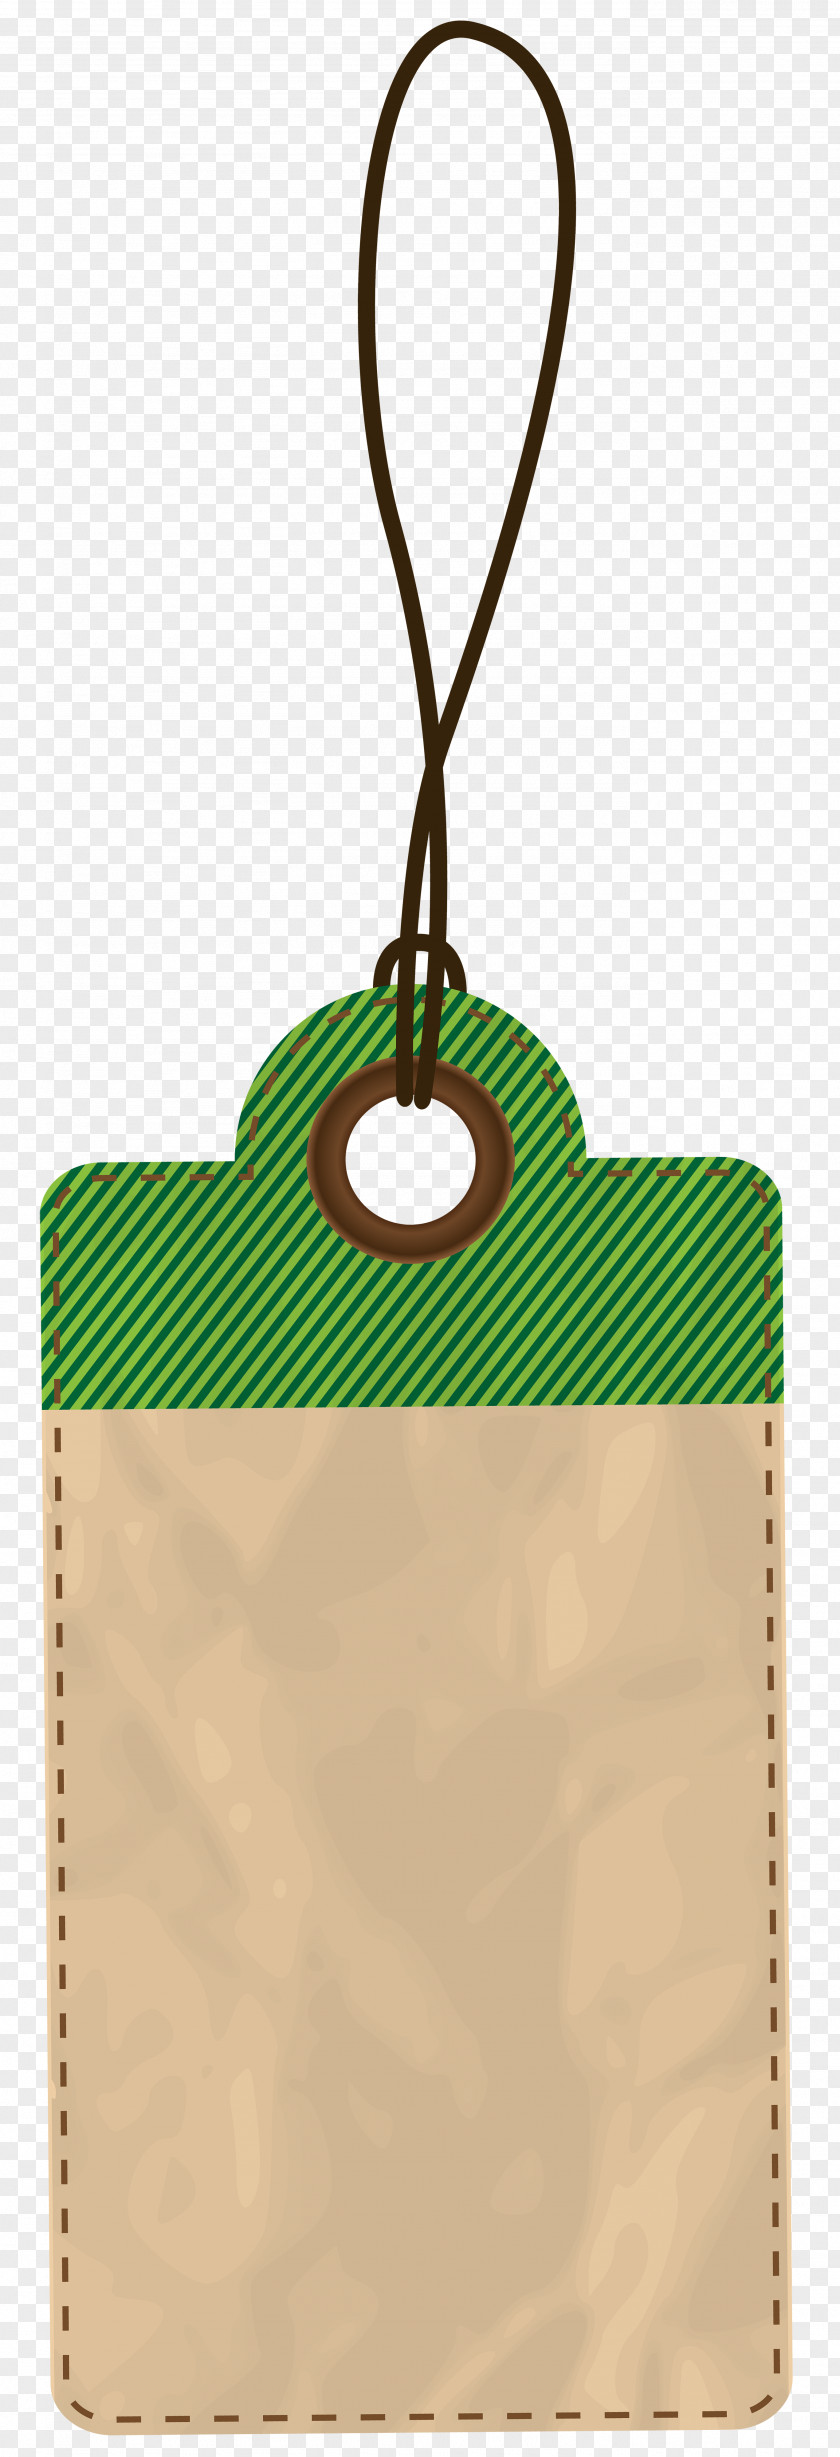 Price Tags Clip Art PNG